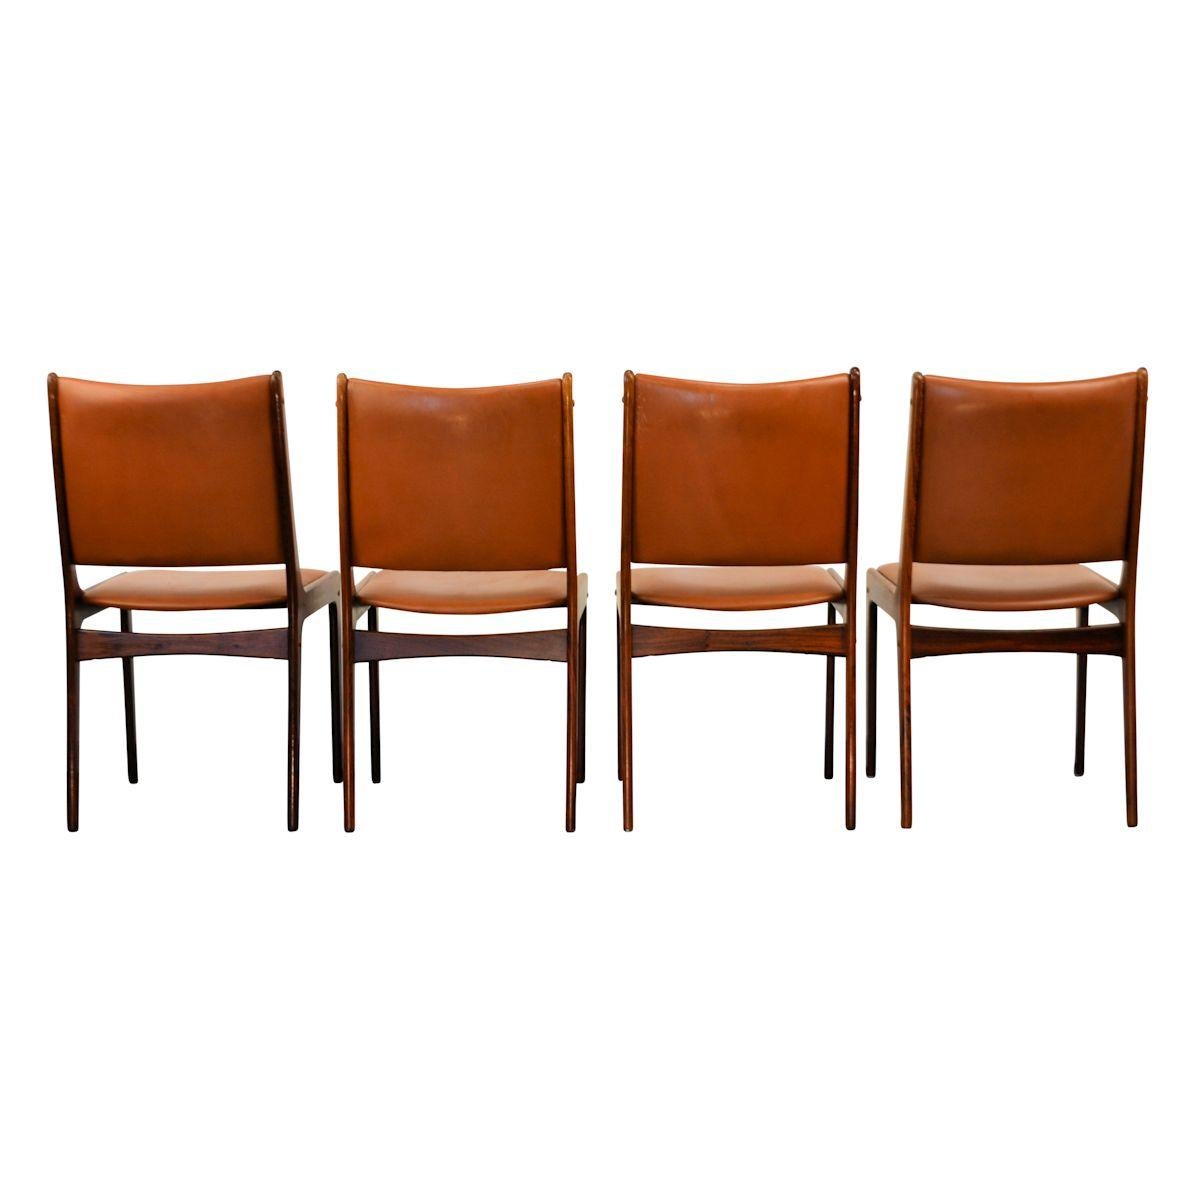 Mid-20th Century Vintage Johannes Andersen Palisander/Leather Dining Chairs, Set of Four